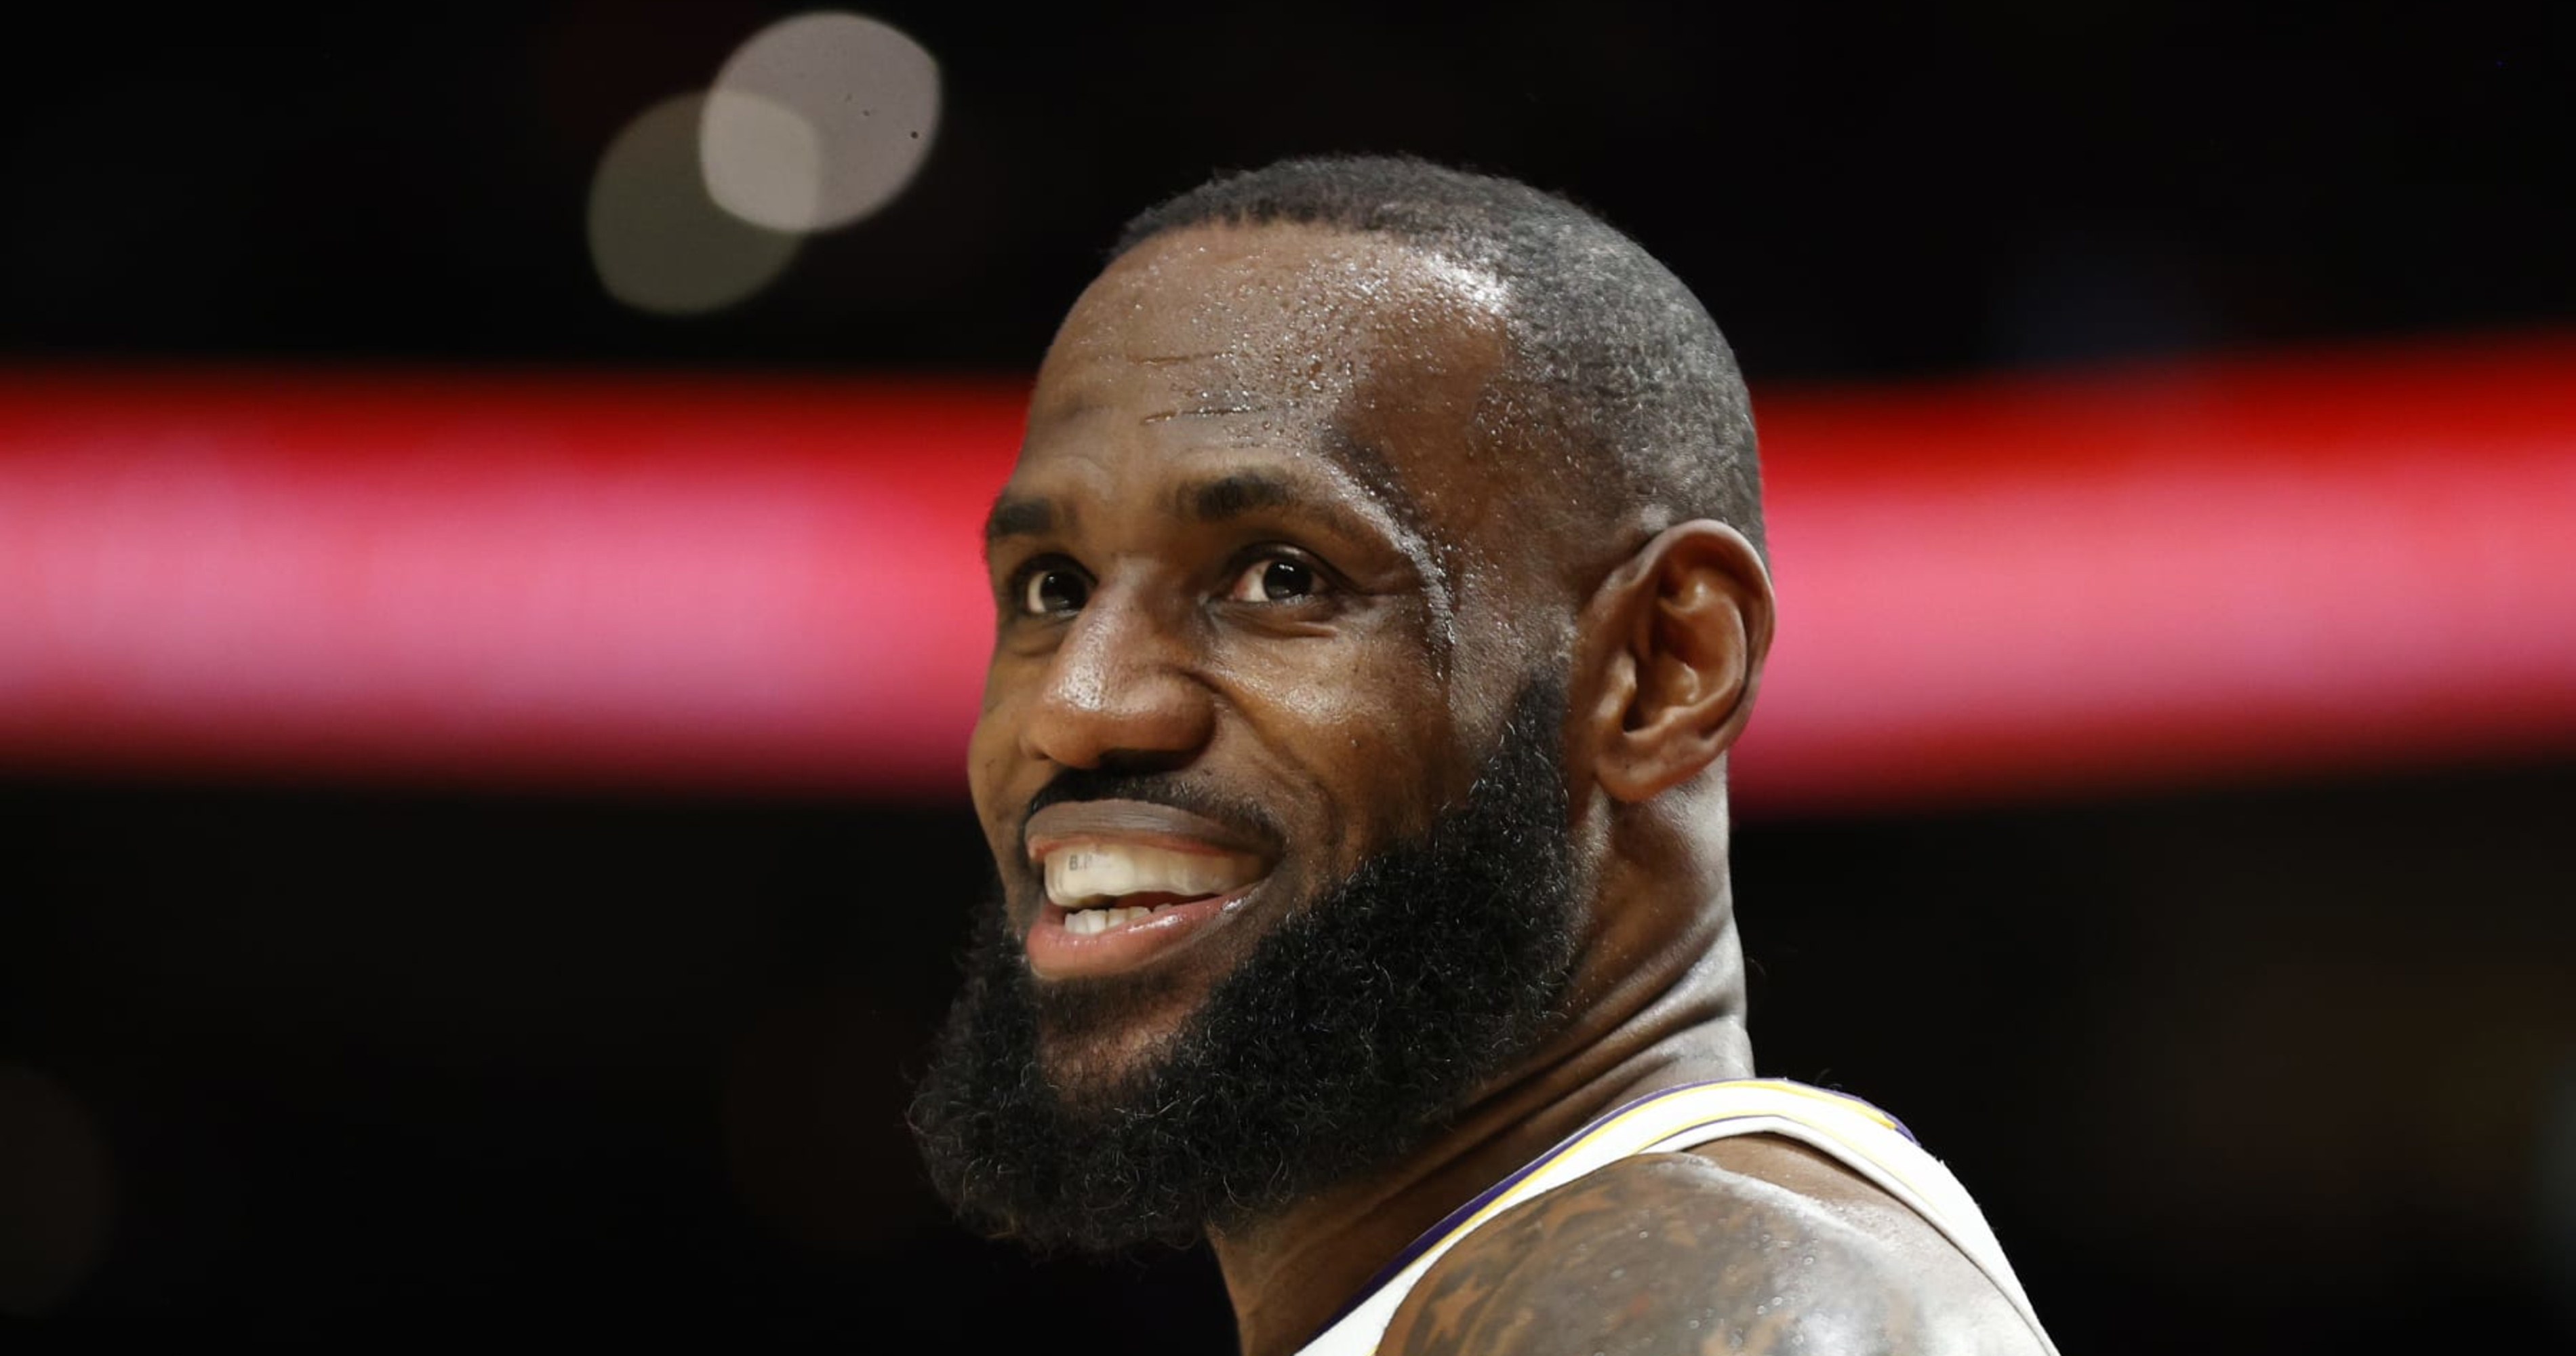 NBA All-Star Game 2023 Live Draft Format Revealed; Captains to Pick Teams Before Tip News, Scores, Highlights, Stats, and Rumors Bleacher Report